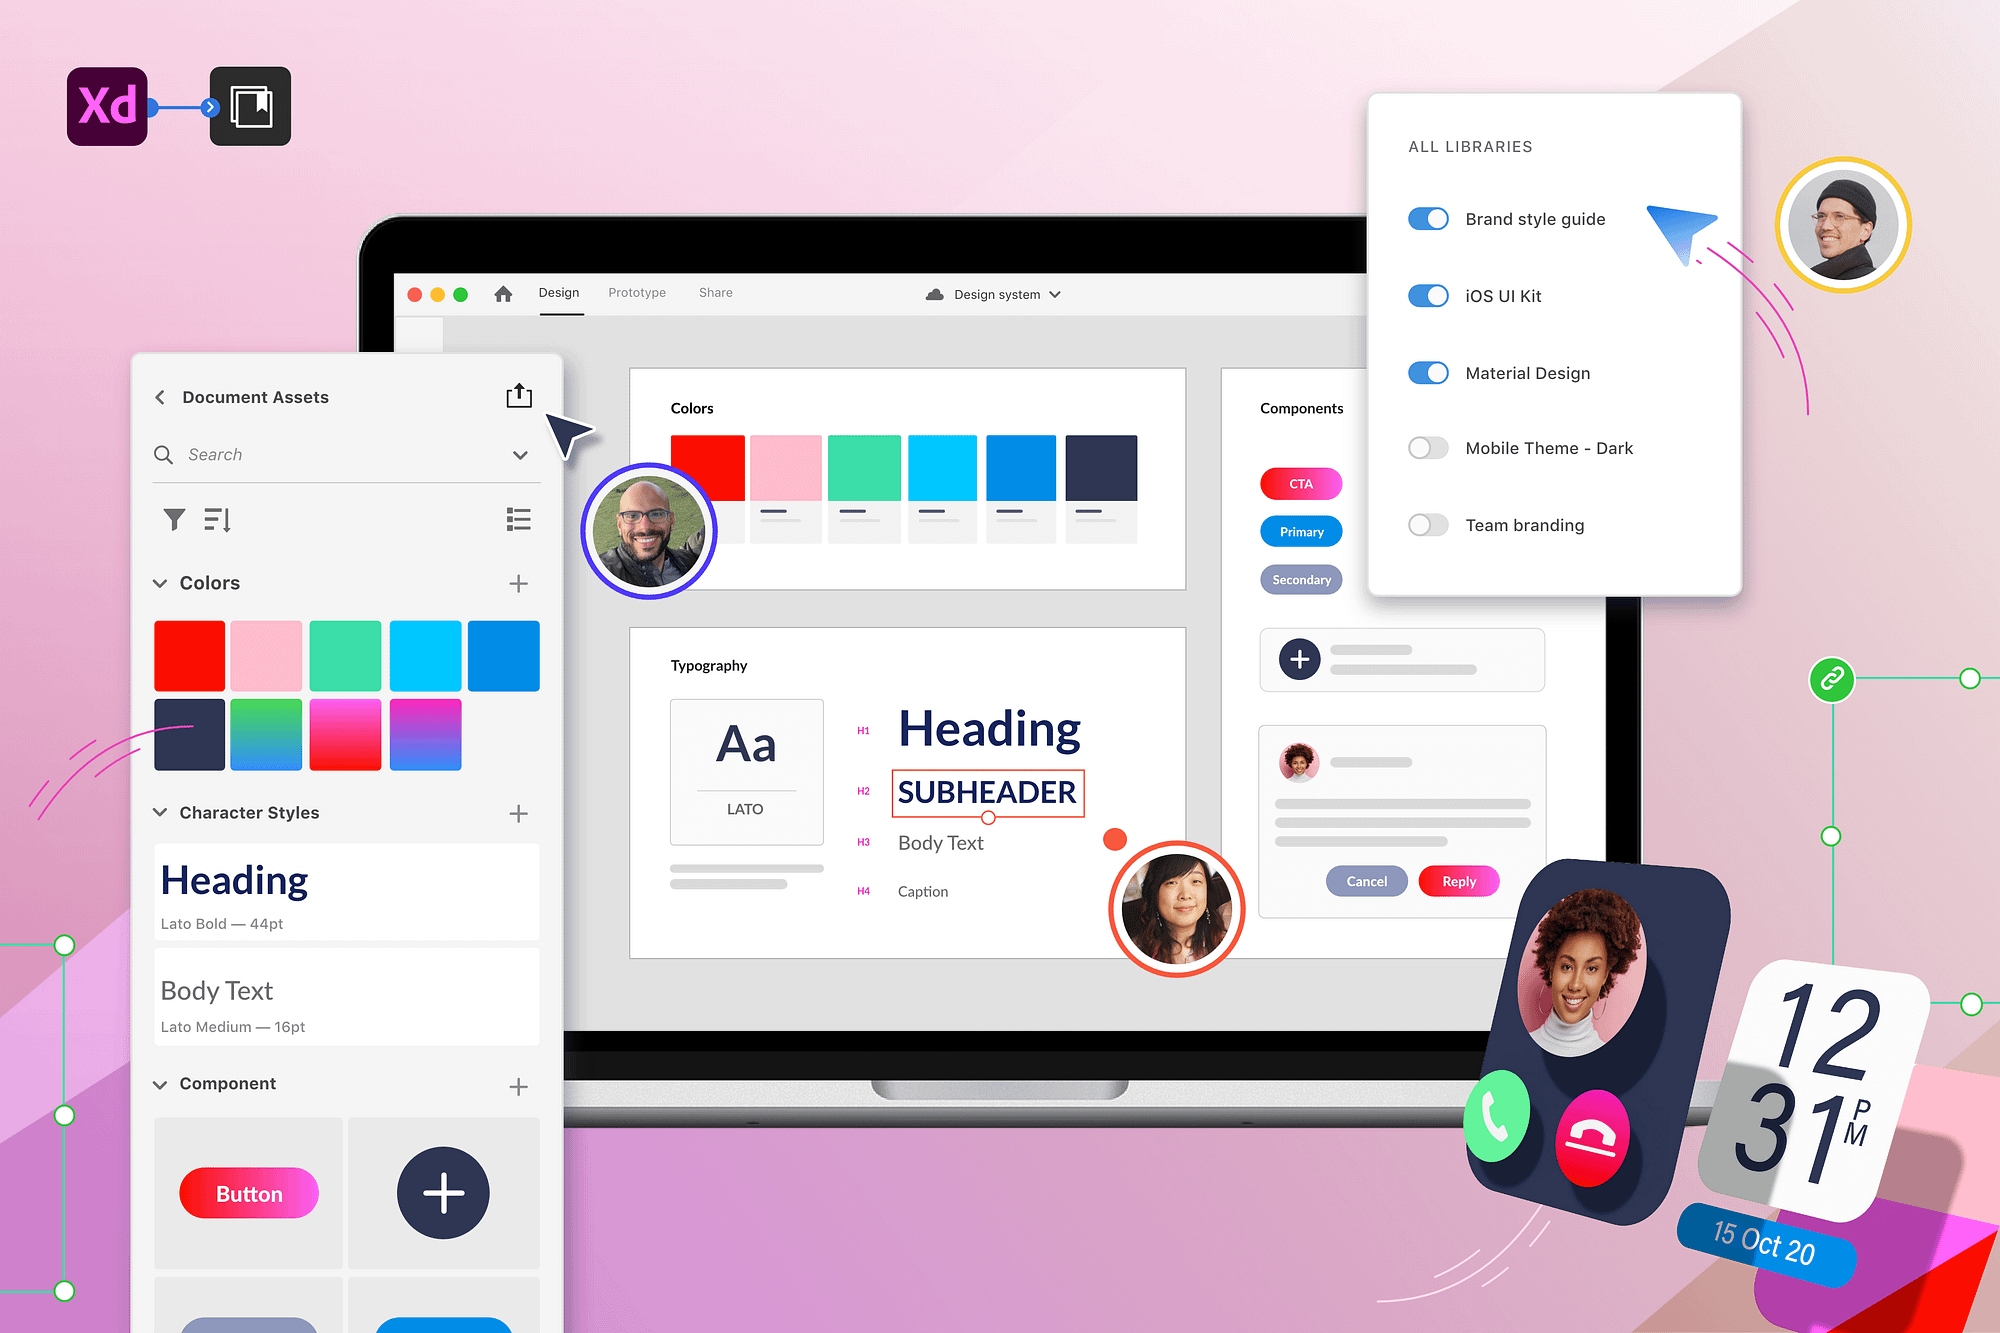 Large cover image showing three designers collaborating on a design system in Adobe XD